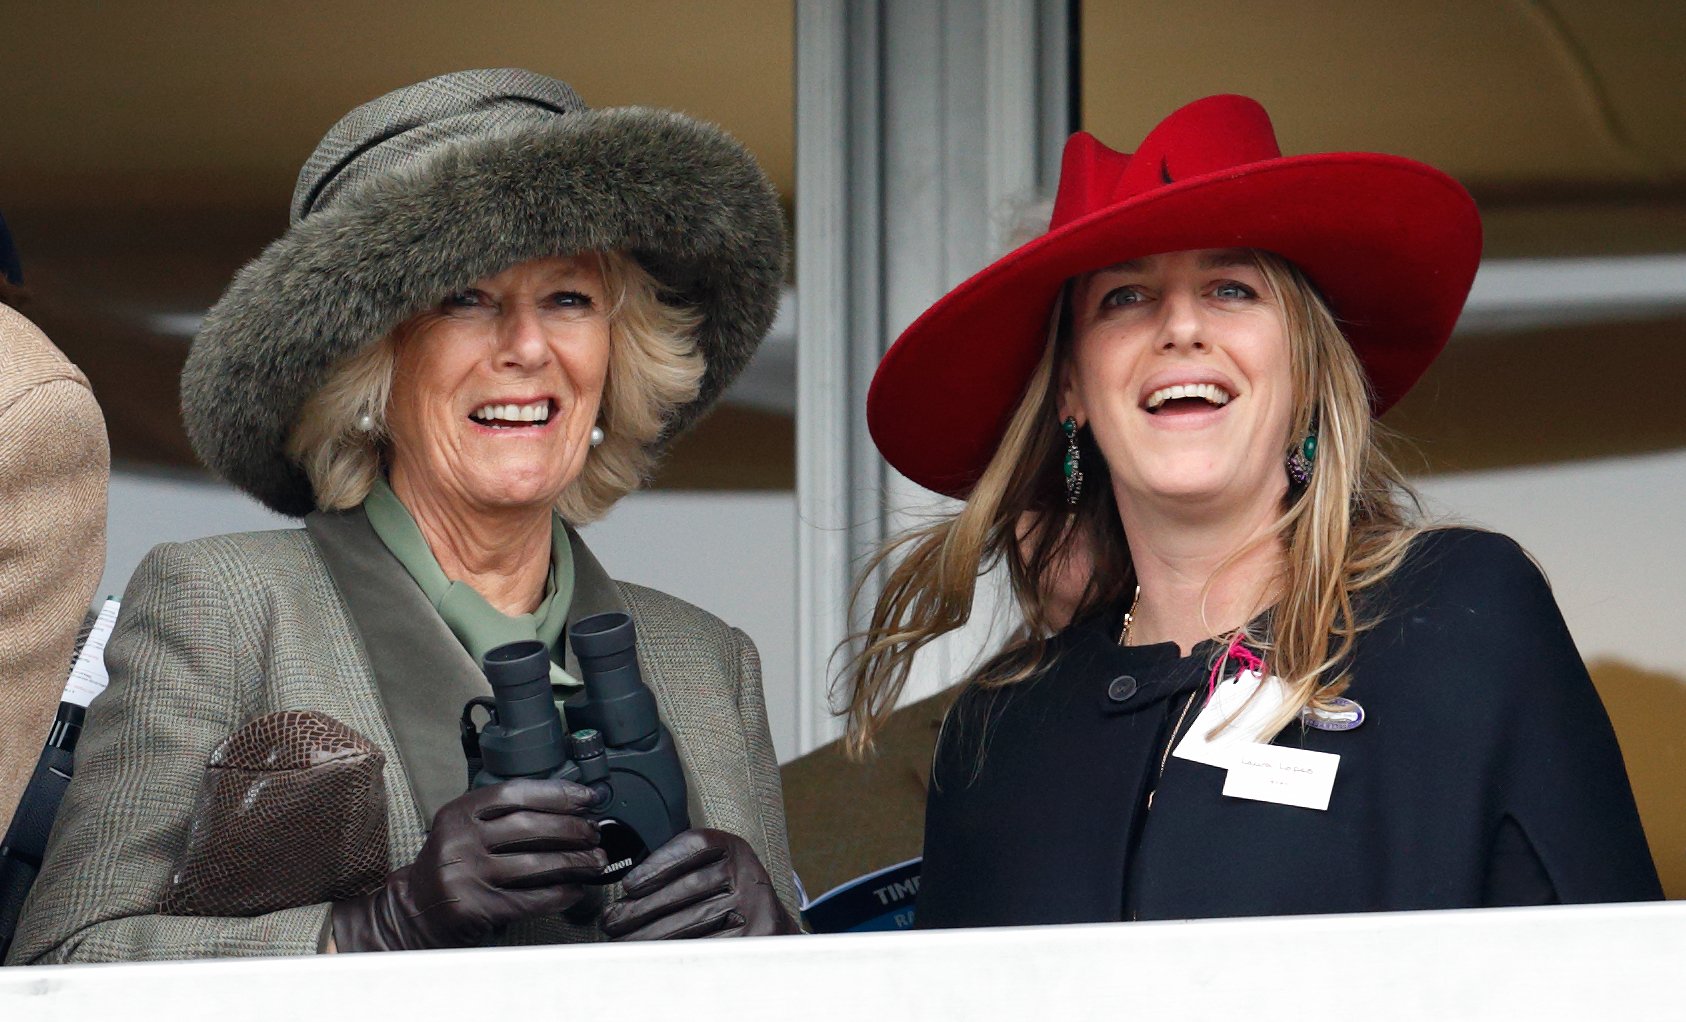 Duchess Camilla and Laura Lopes watch the racing at the Cheltenham Festival at Cheltenham Racecourse on March 11, 2015, in England. | Source: Getty Images